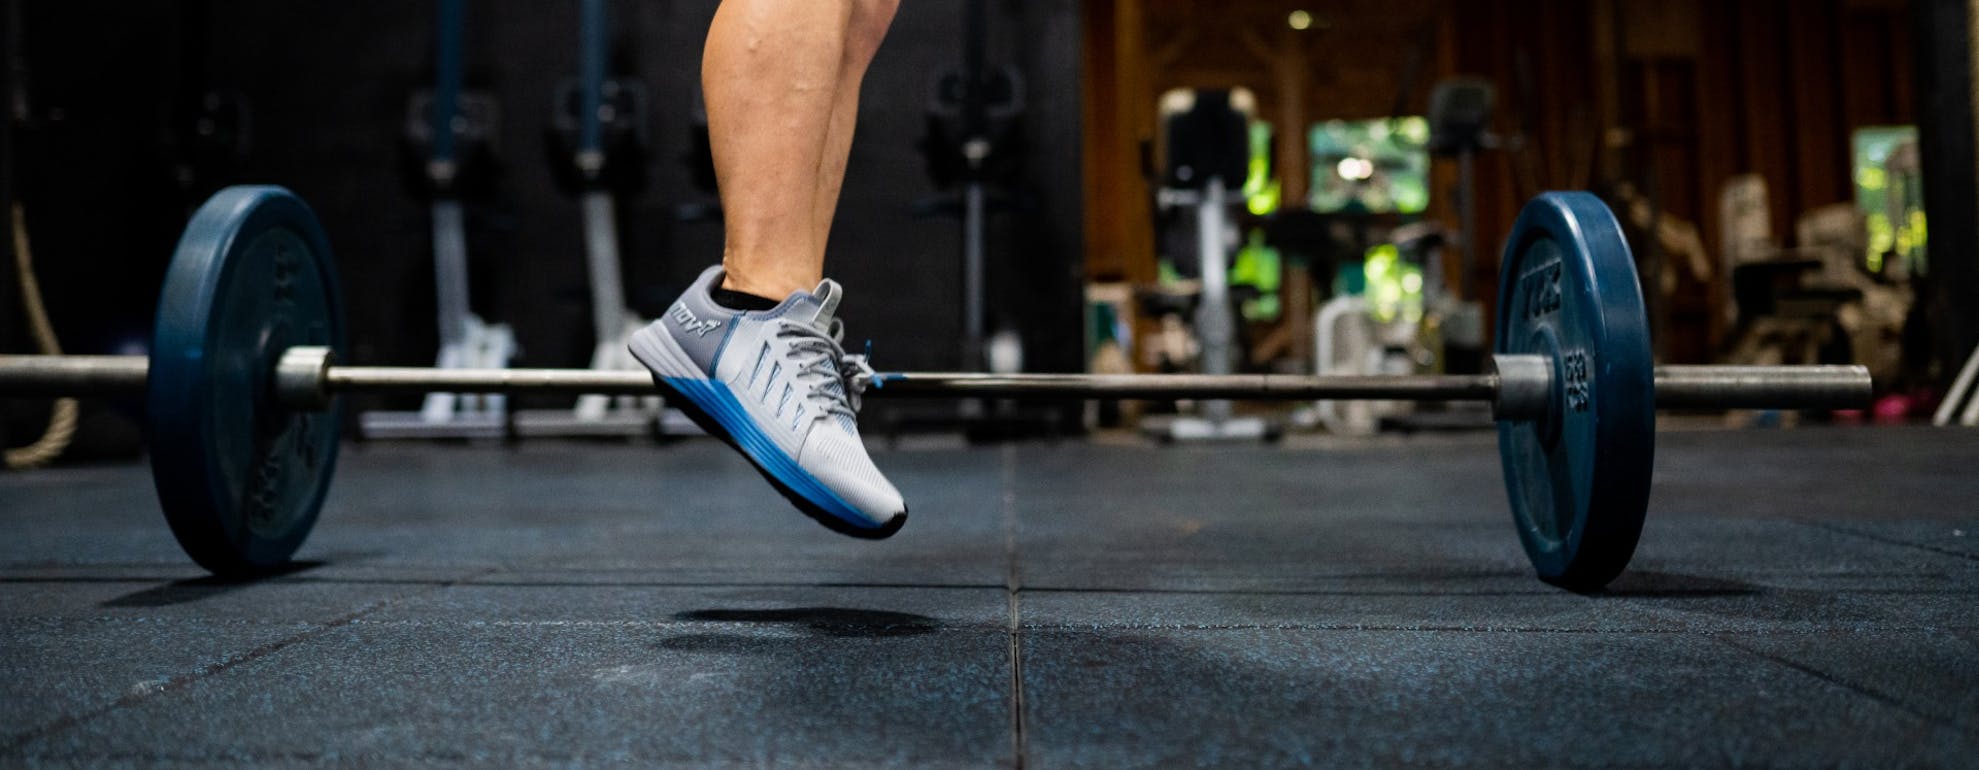 How to Choose the Right Gym Shoes